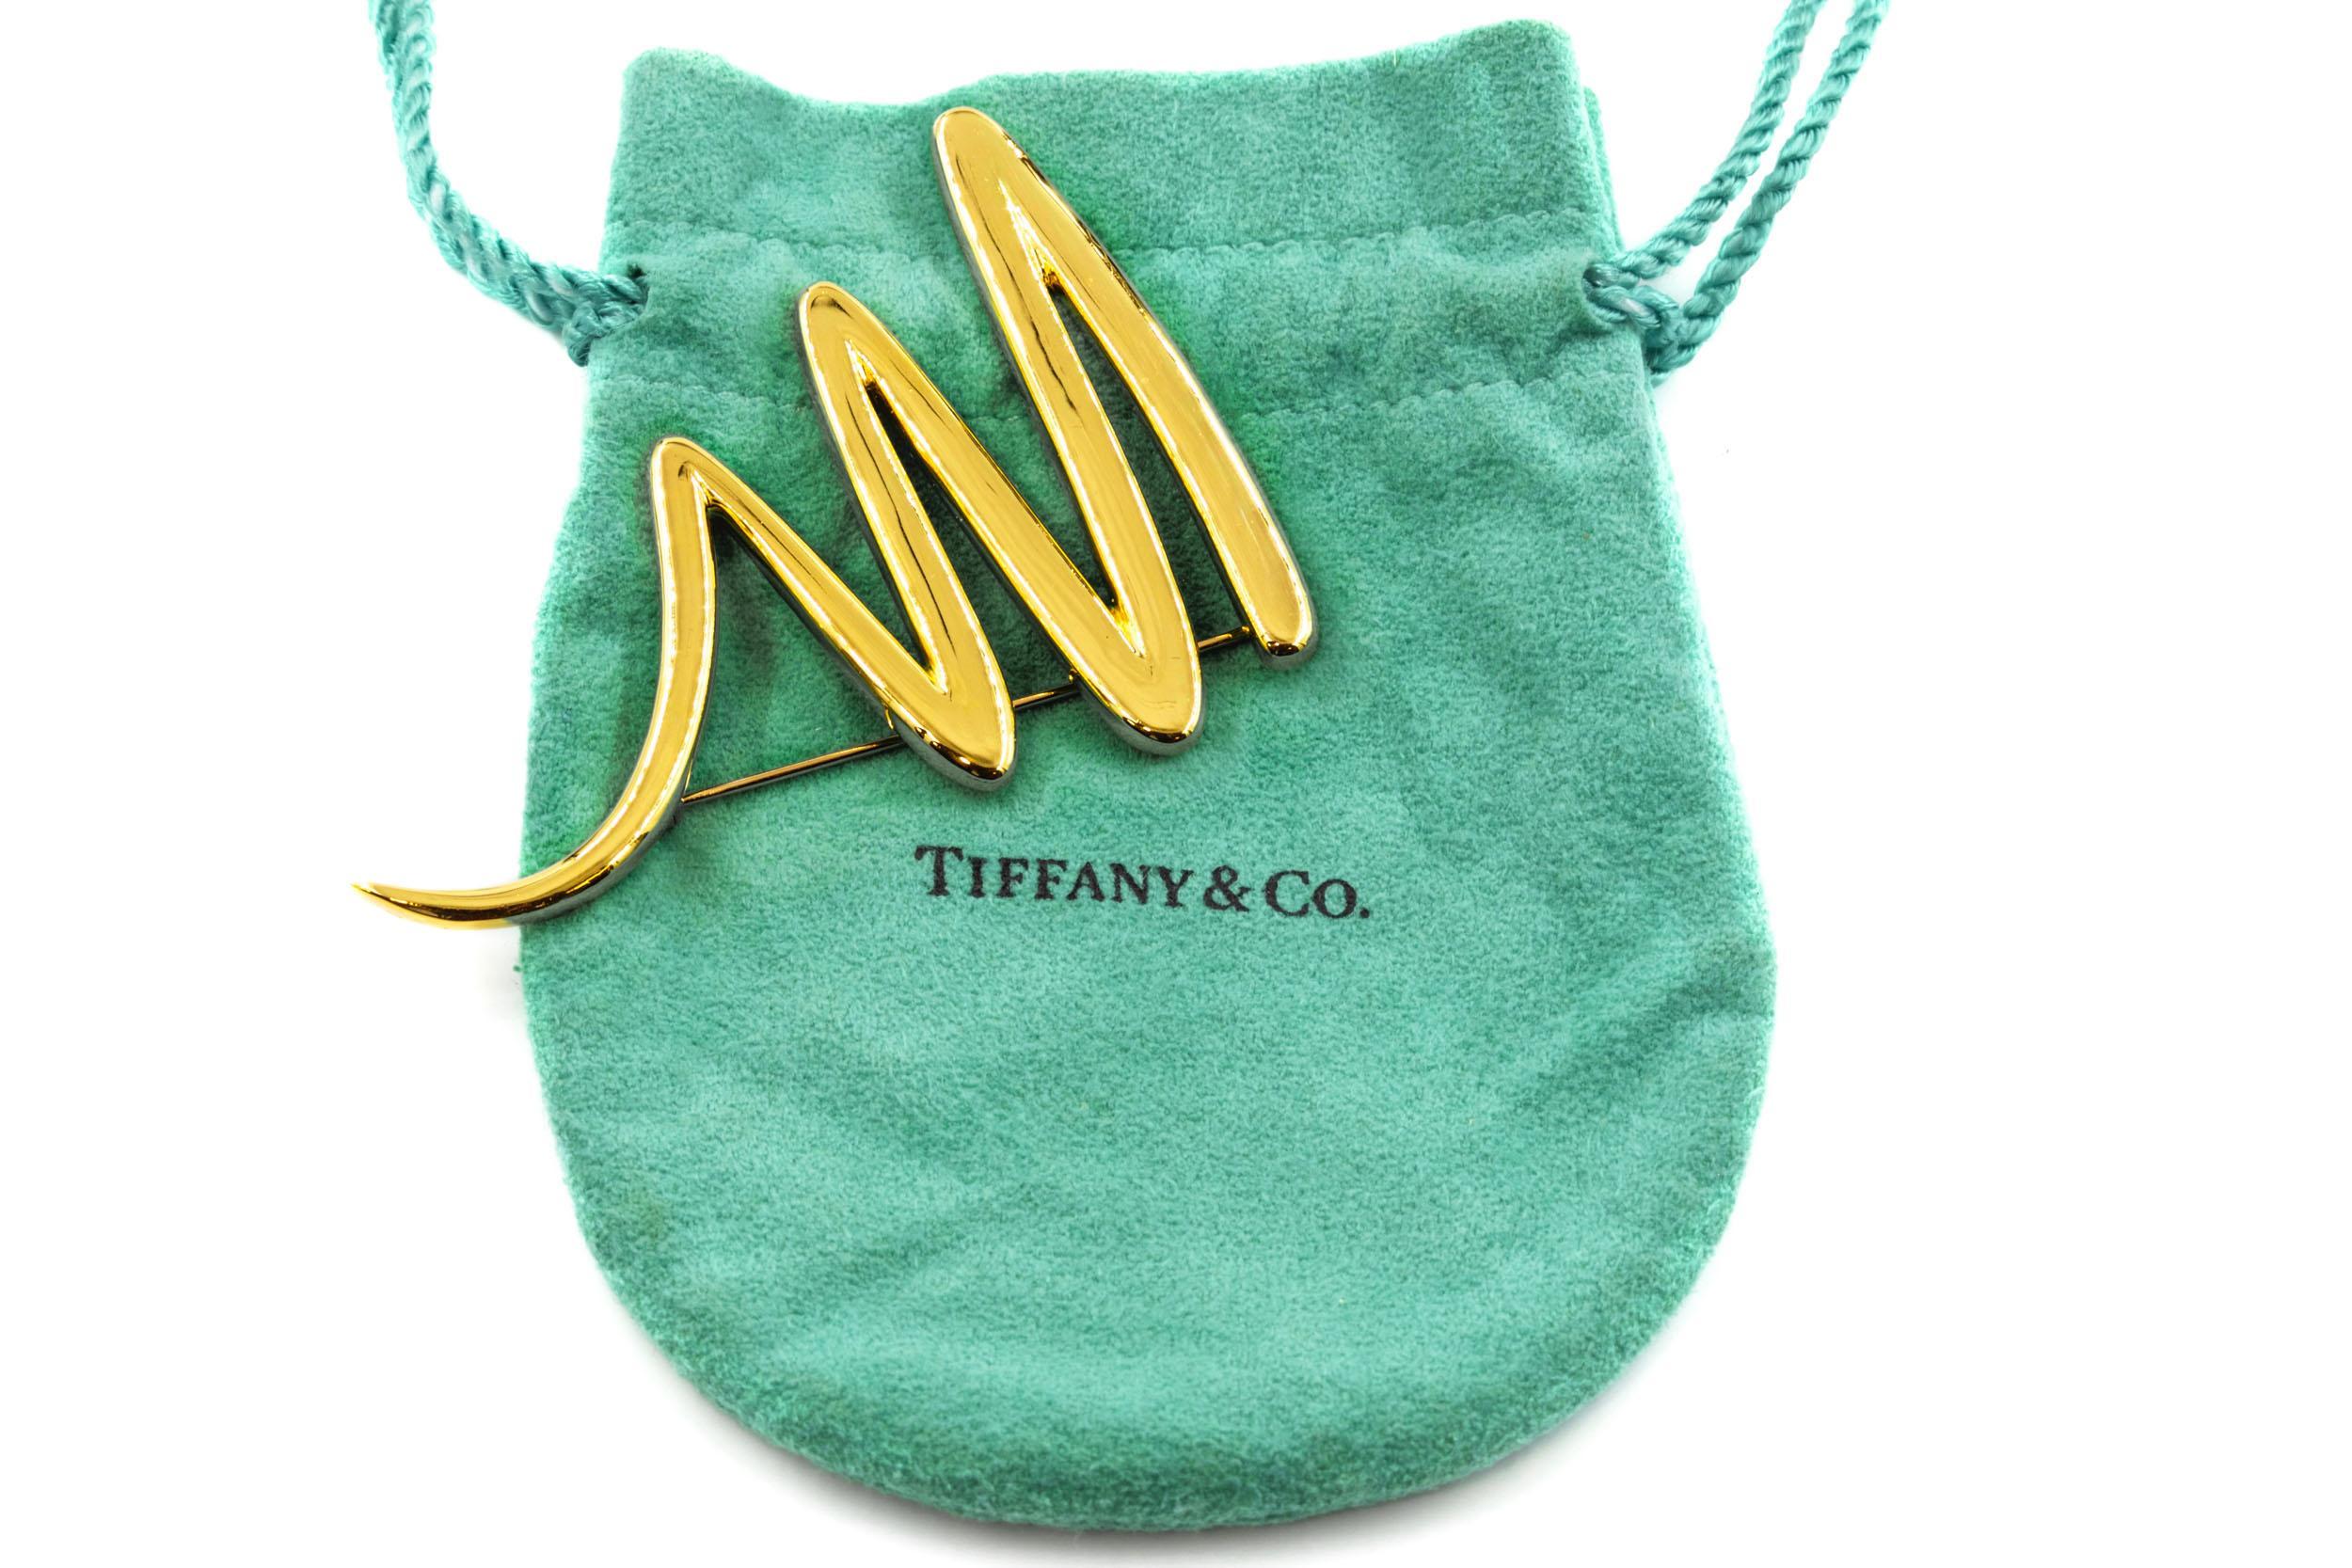 PALOMA PICASSO FOR TIFFANY & CO ZIG-ZAG SQUIGGLE PIN
Circa 1983, with original Tiffany & Co. drawstring pouch
Item # 010SIU17A 

One of the more substantial versions of this iconic design by Paloma Picasso for Tiffany & Co, this version comes in at